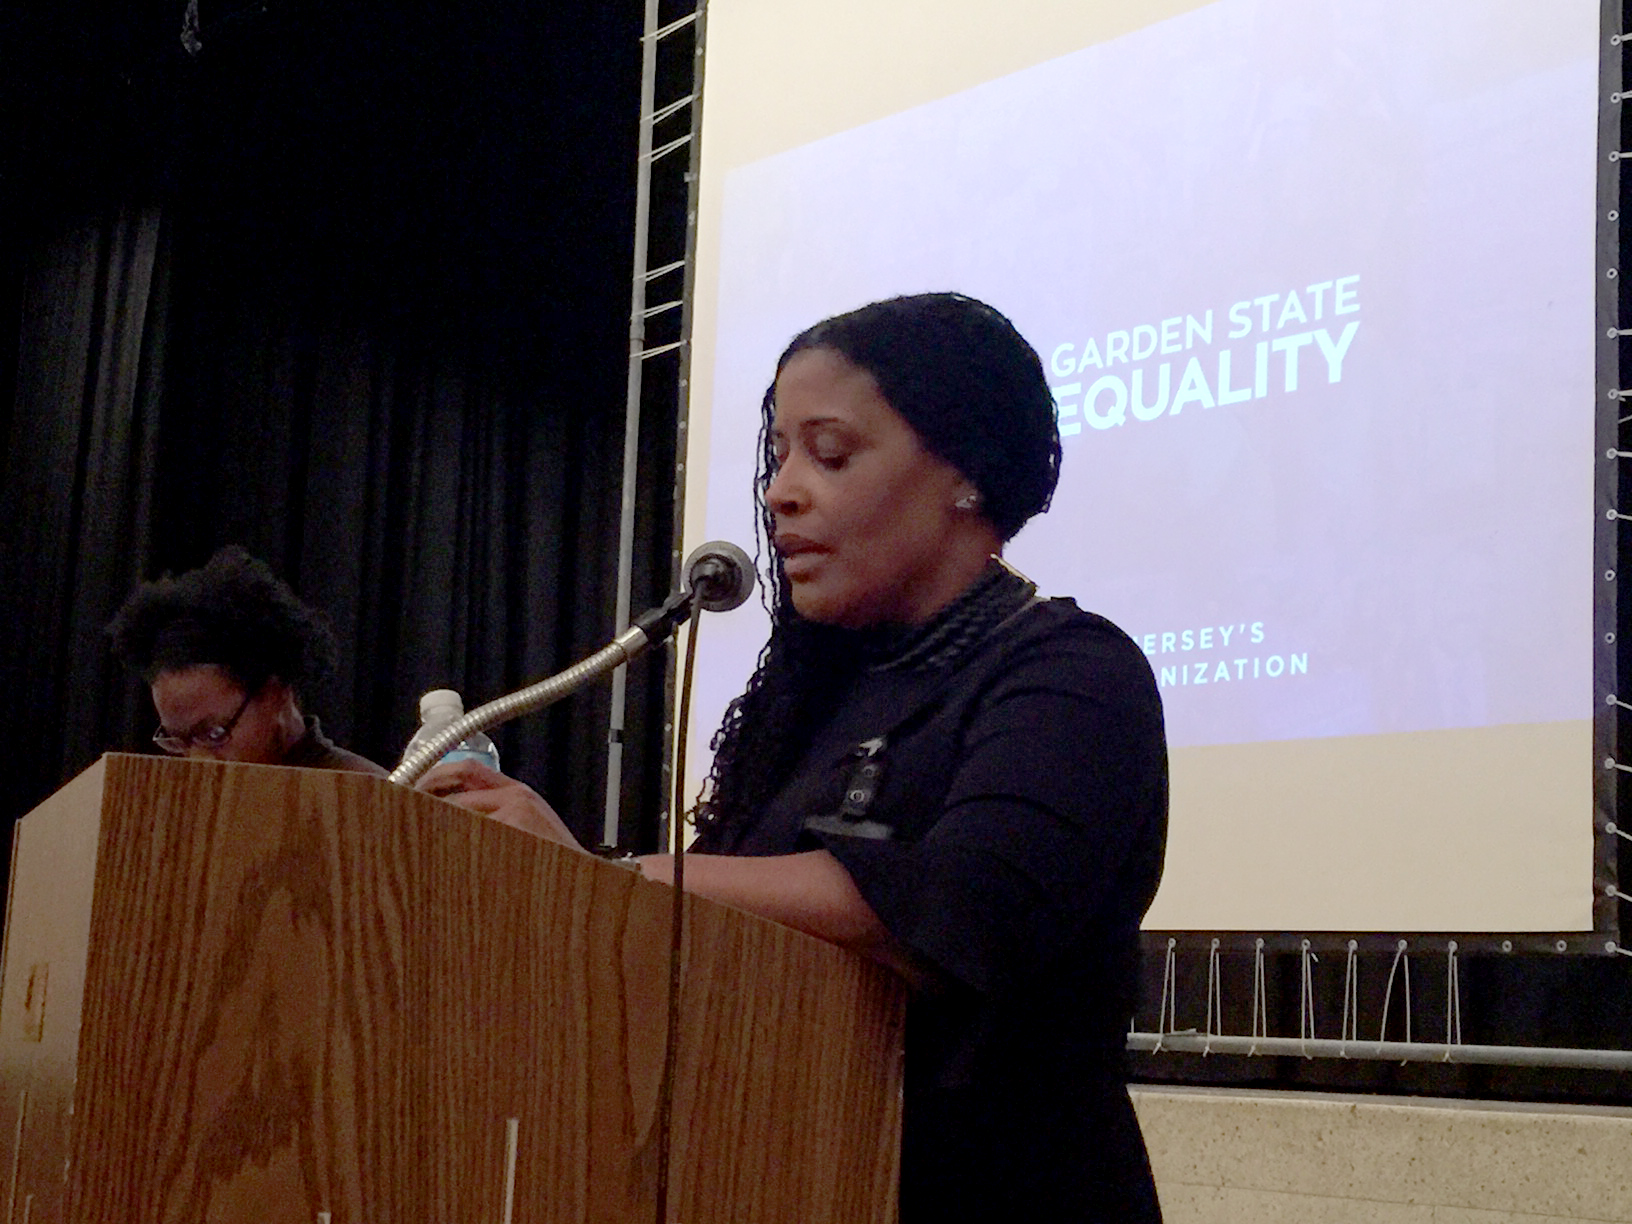 Montclair schools hold talk on discussing gender identity issues with kids